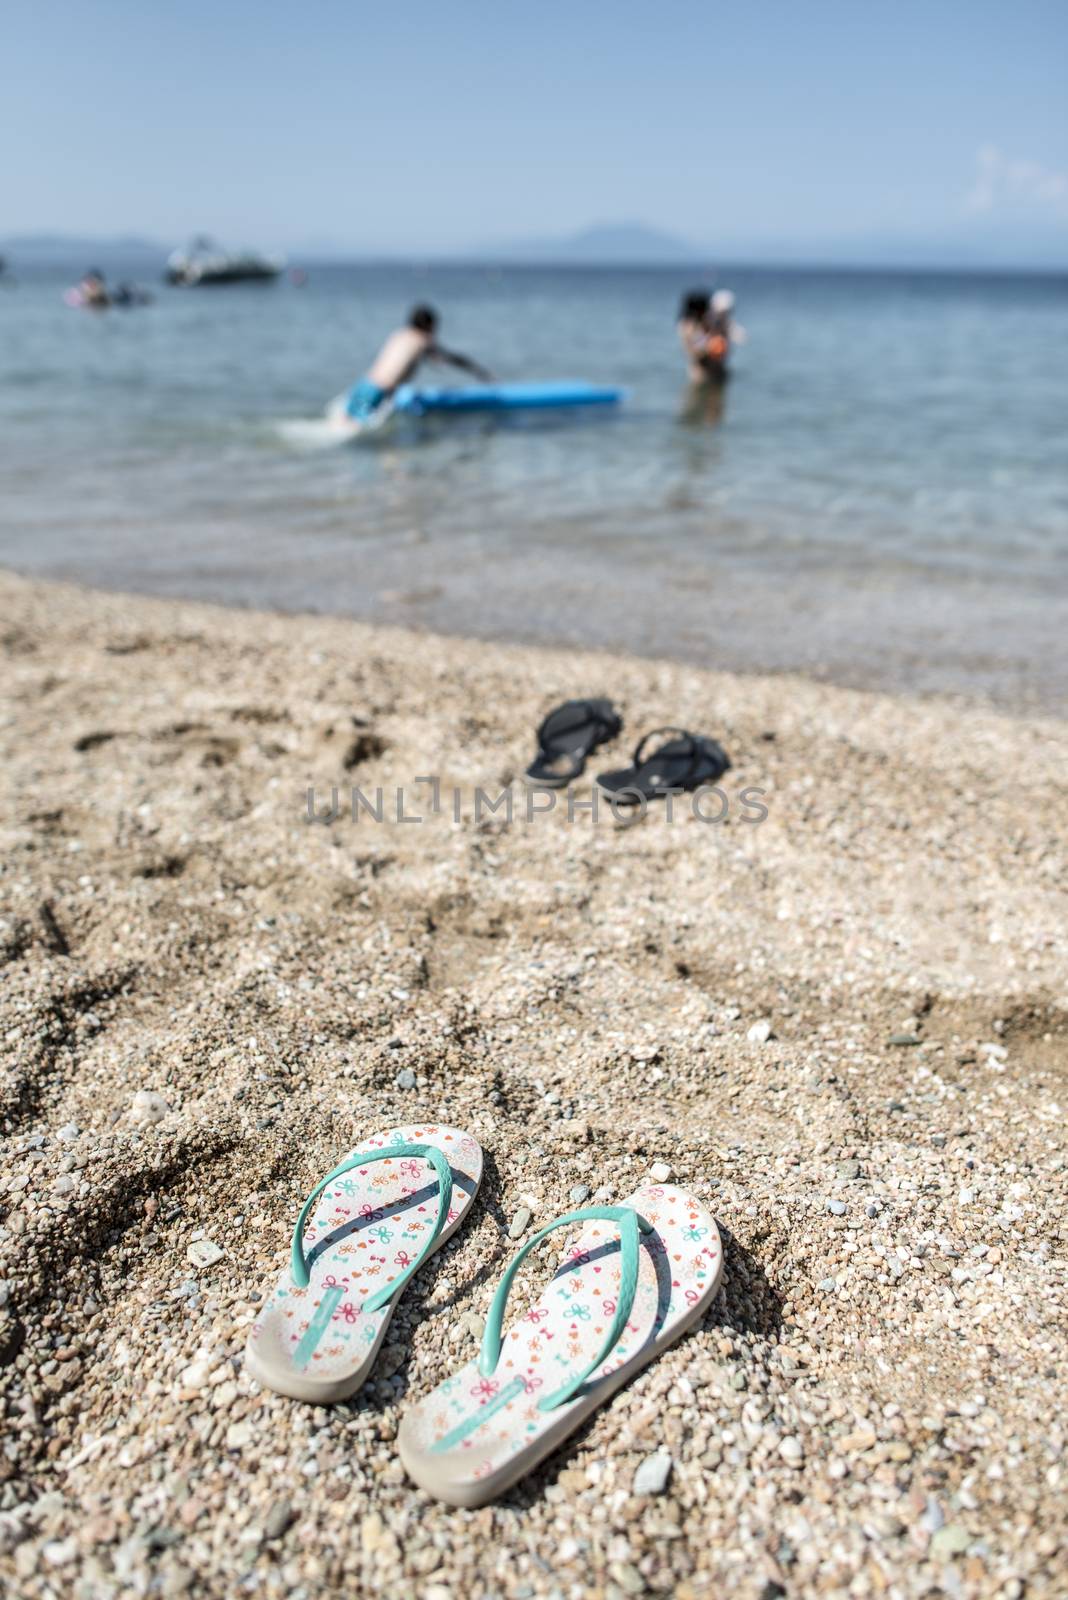 Slippers in the sand on the beach and people at sea. 